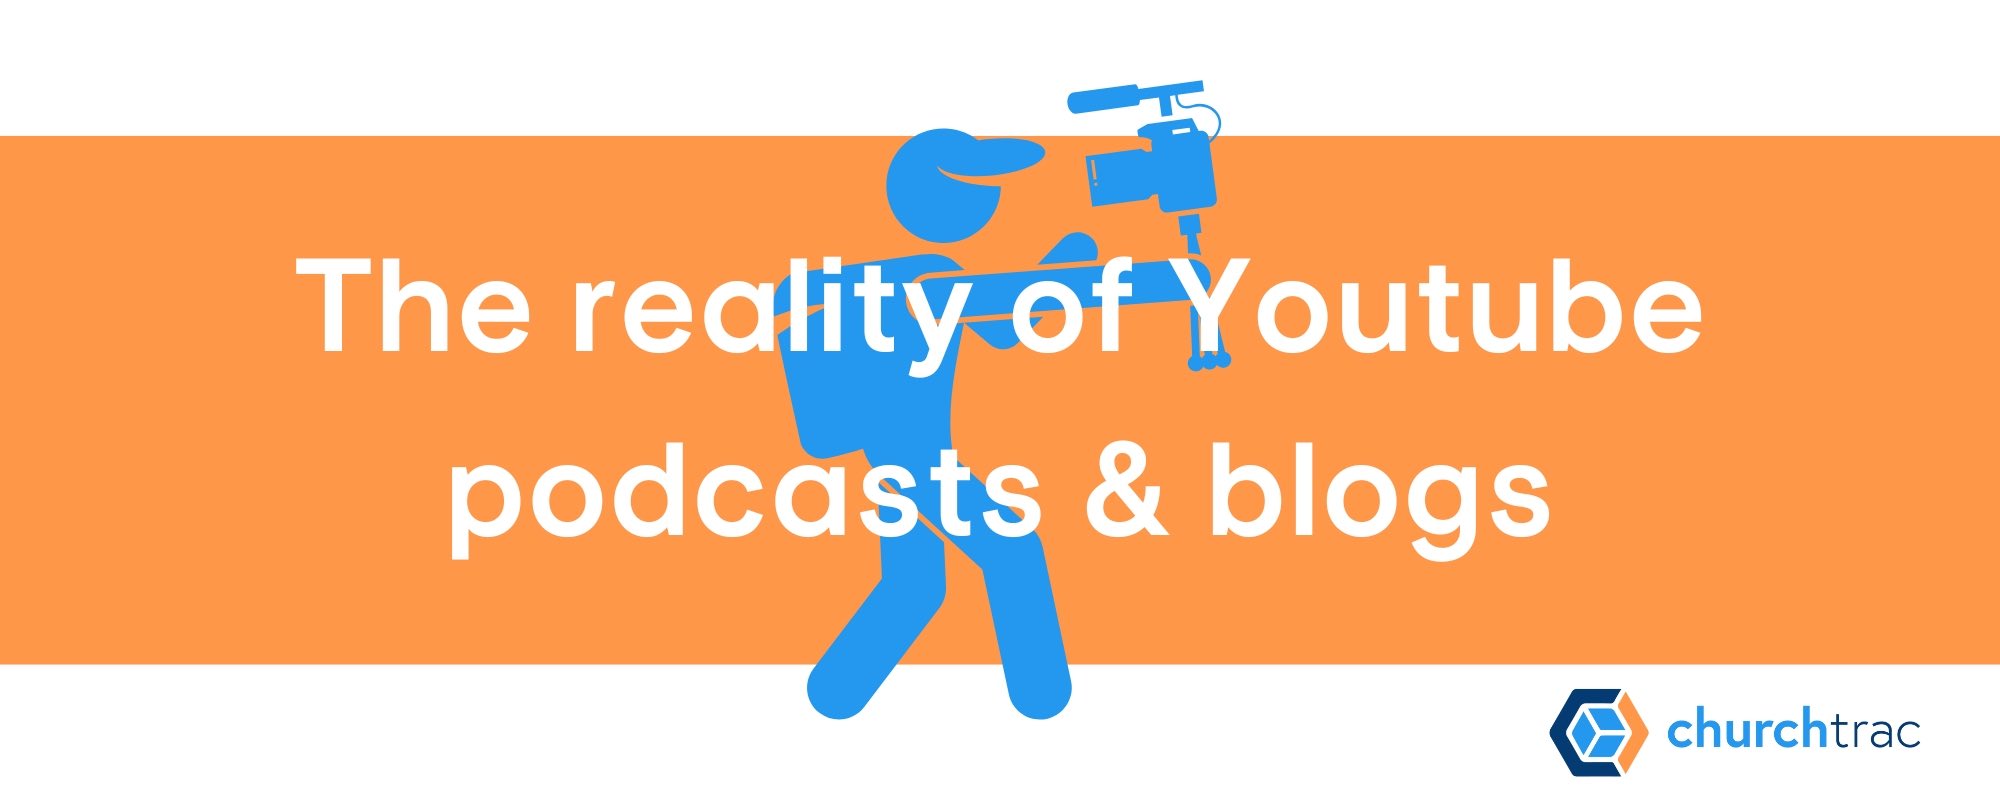 The reality of Youtube, podcasting, and blogging as side hustles for pastors